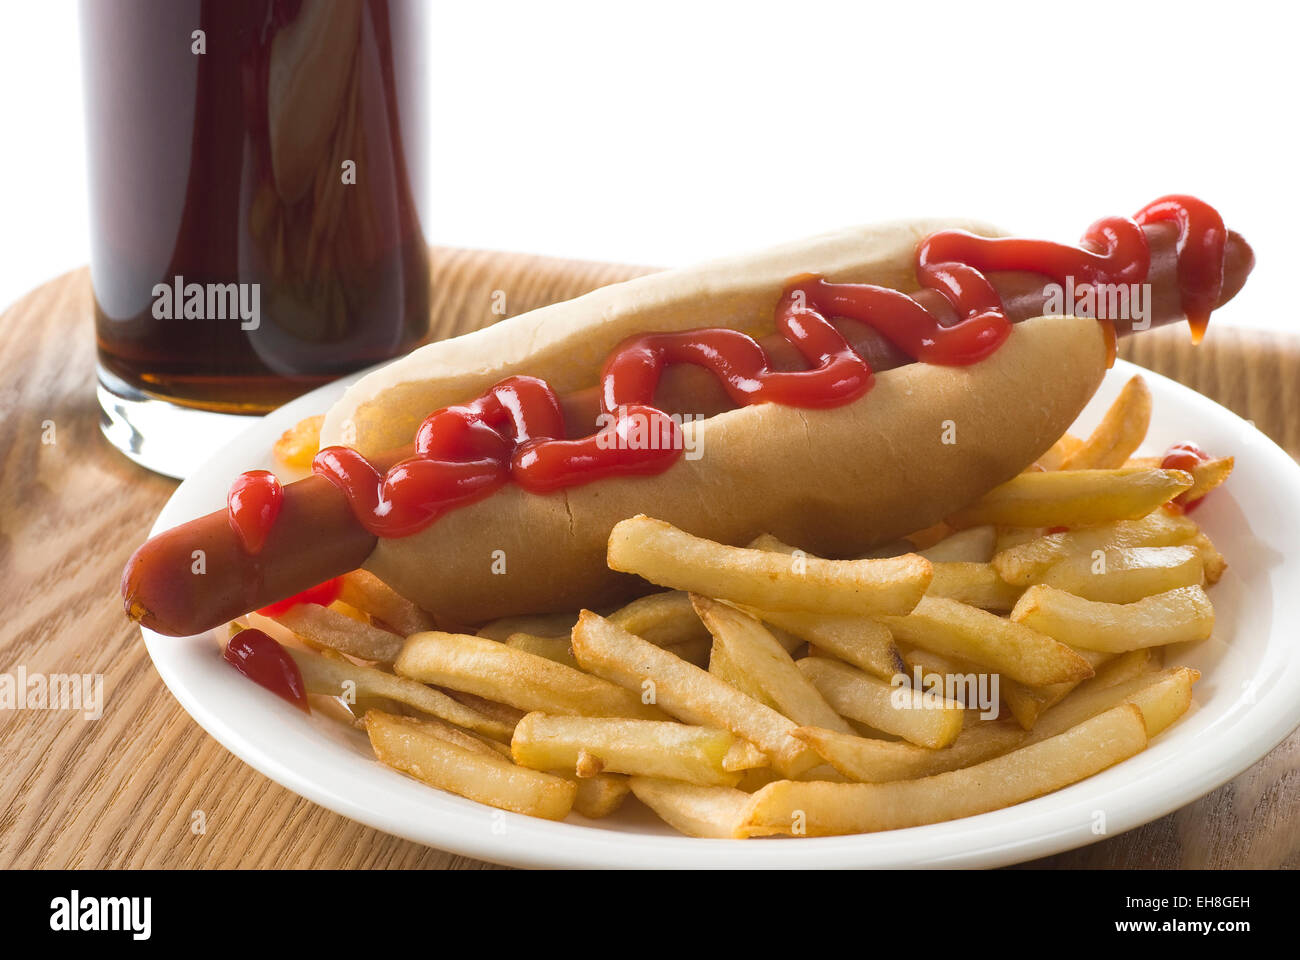 Sausage with bread, ketchup and french fries. Stock Photo